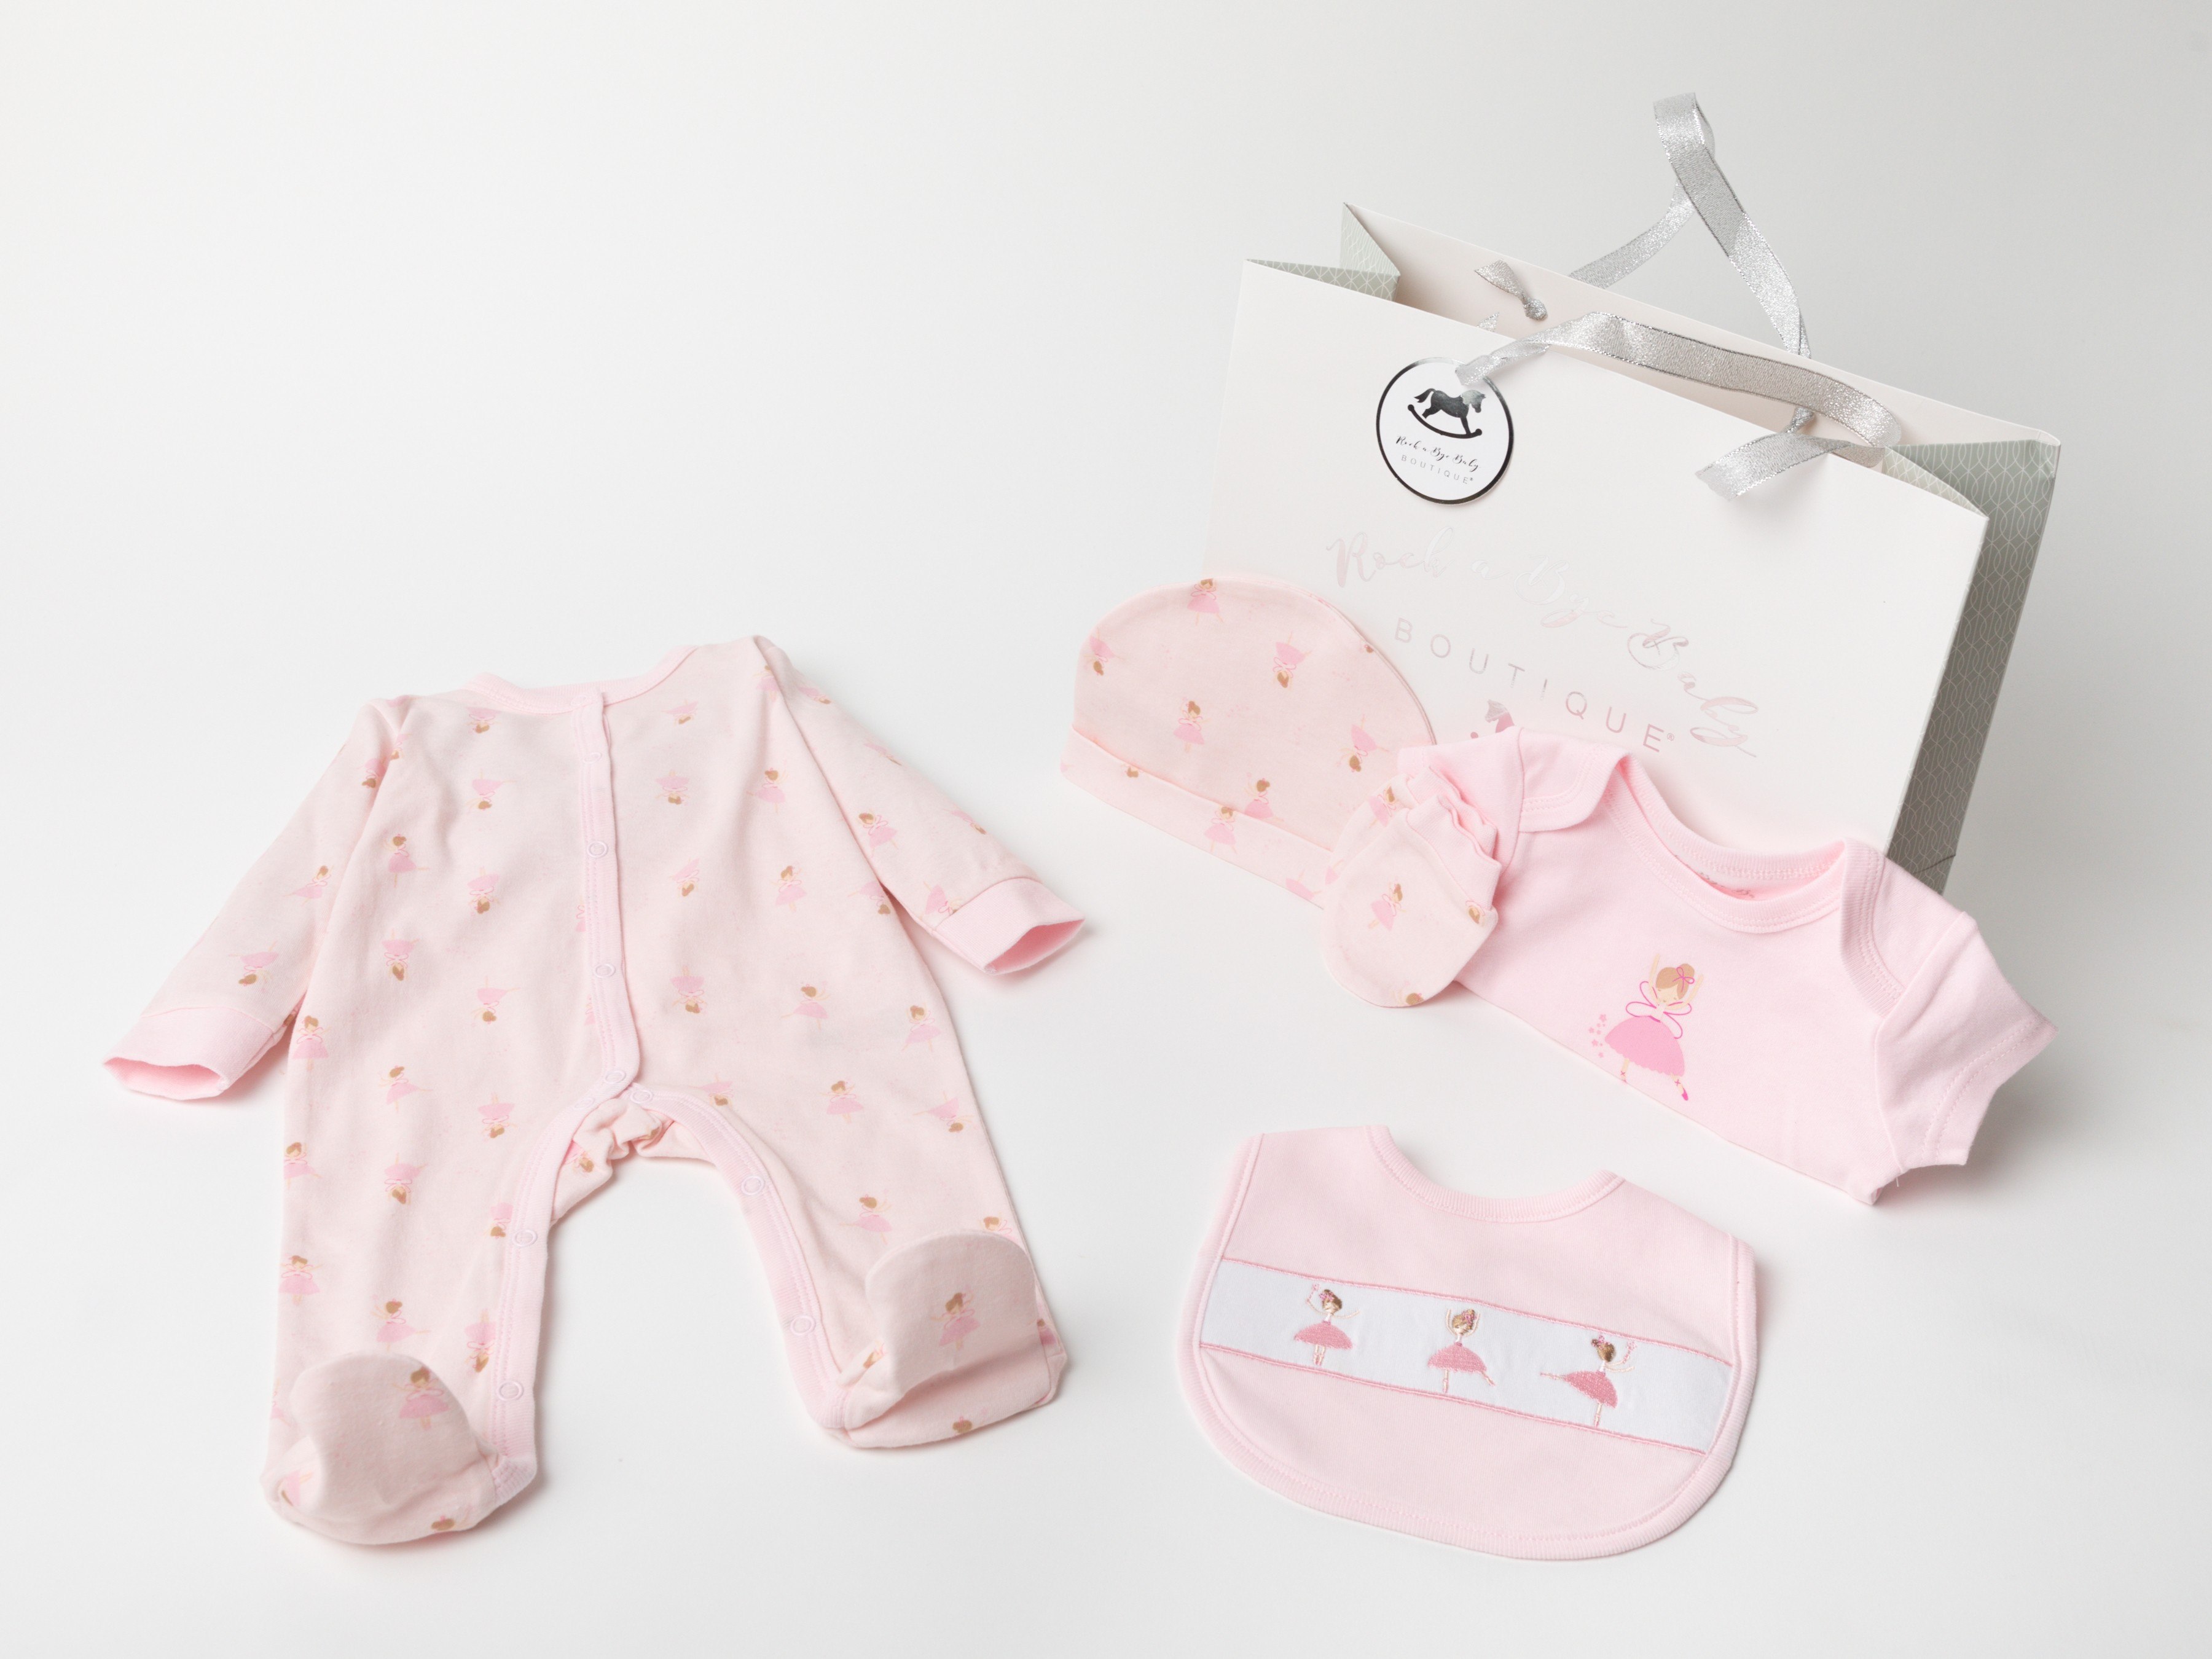 Rock a Bye Baby Boutique 'BalLerina'  Baby Girls 5 Piece Set PACK OF 4